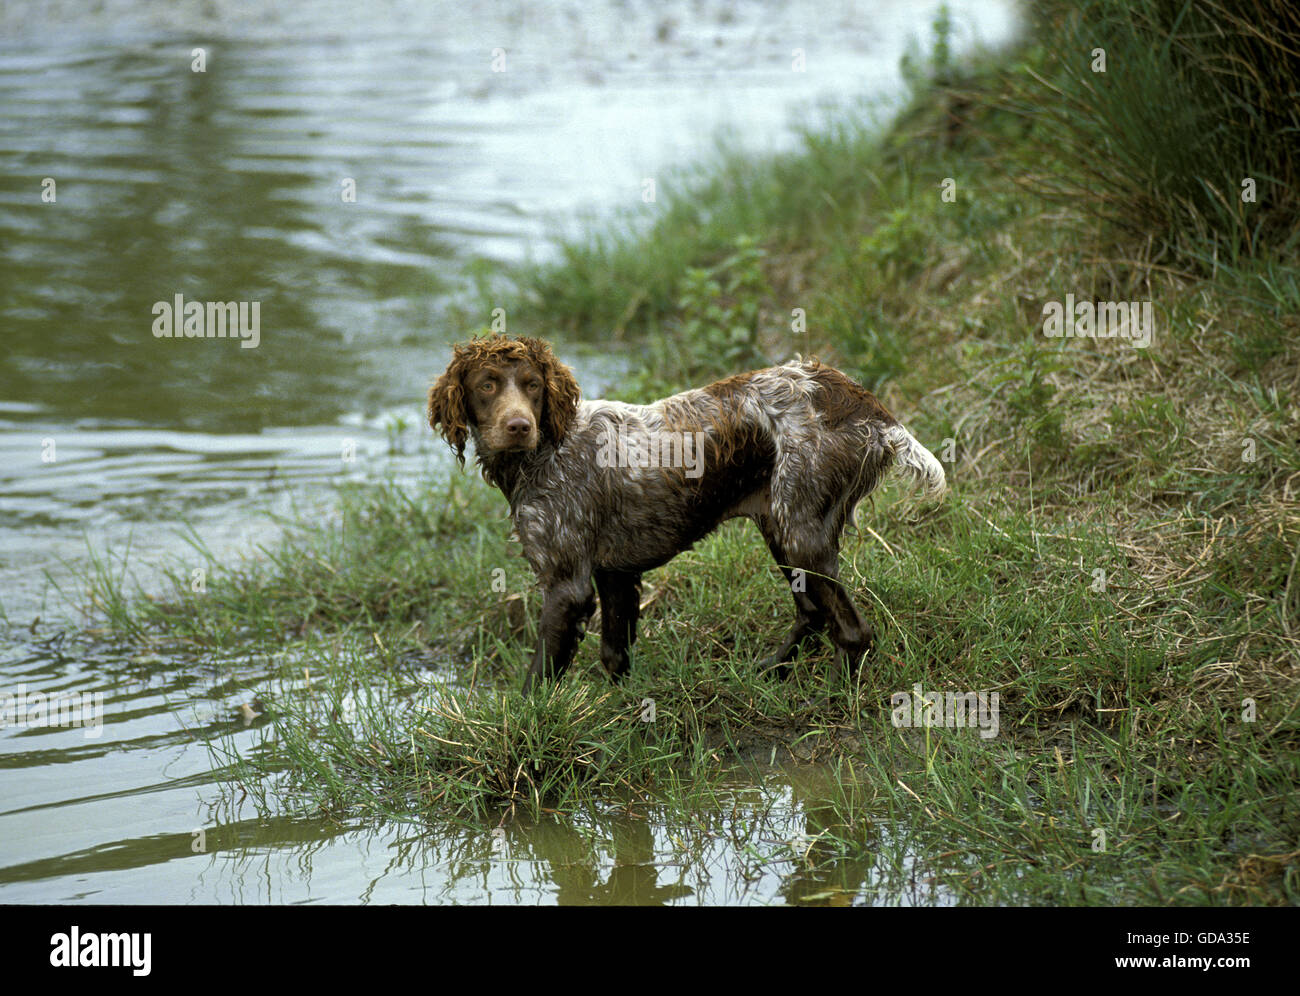 Pont Audemer Spaniel, a French Breed Dog Stock Photo